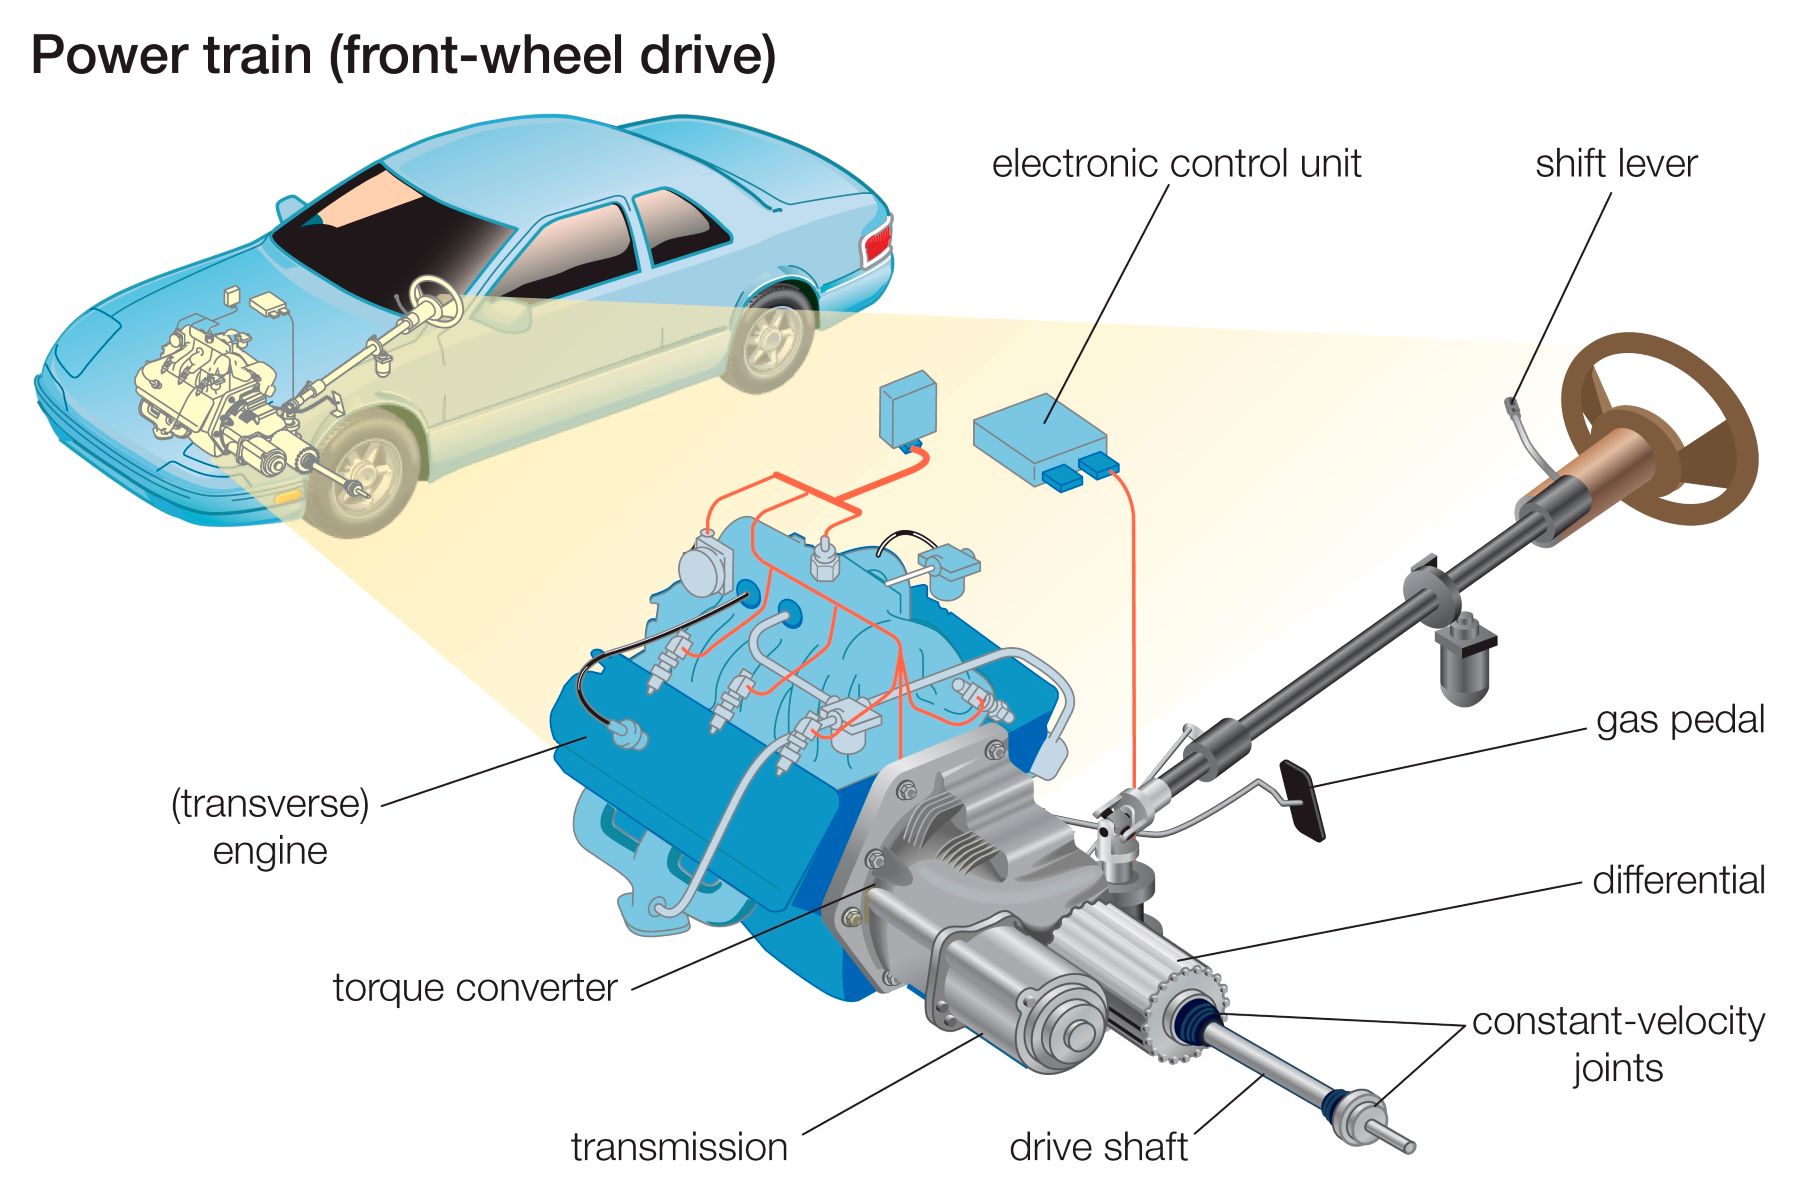 A front-wheel drive diagram visualization of engine and transmission incorporation